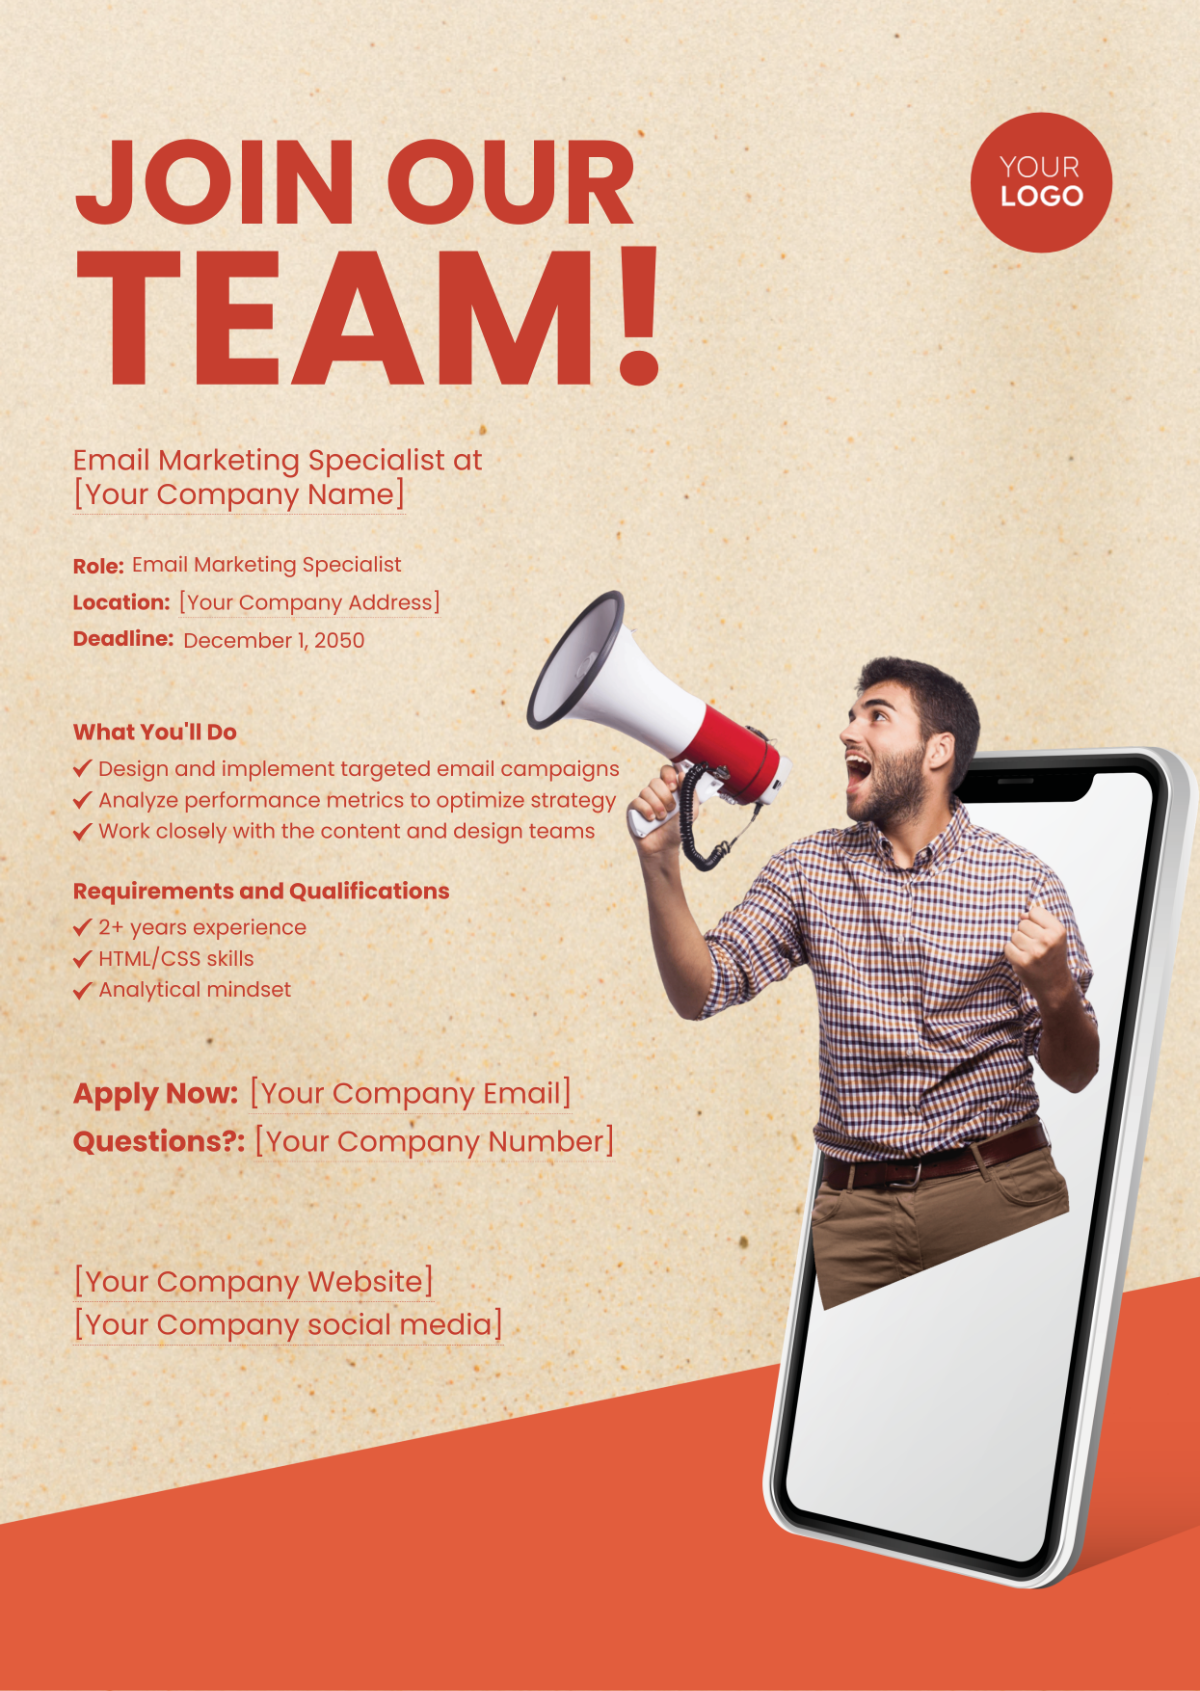 Email Marketing Specialist Job Ad Template